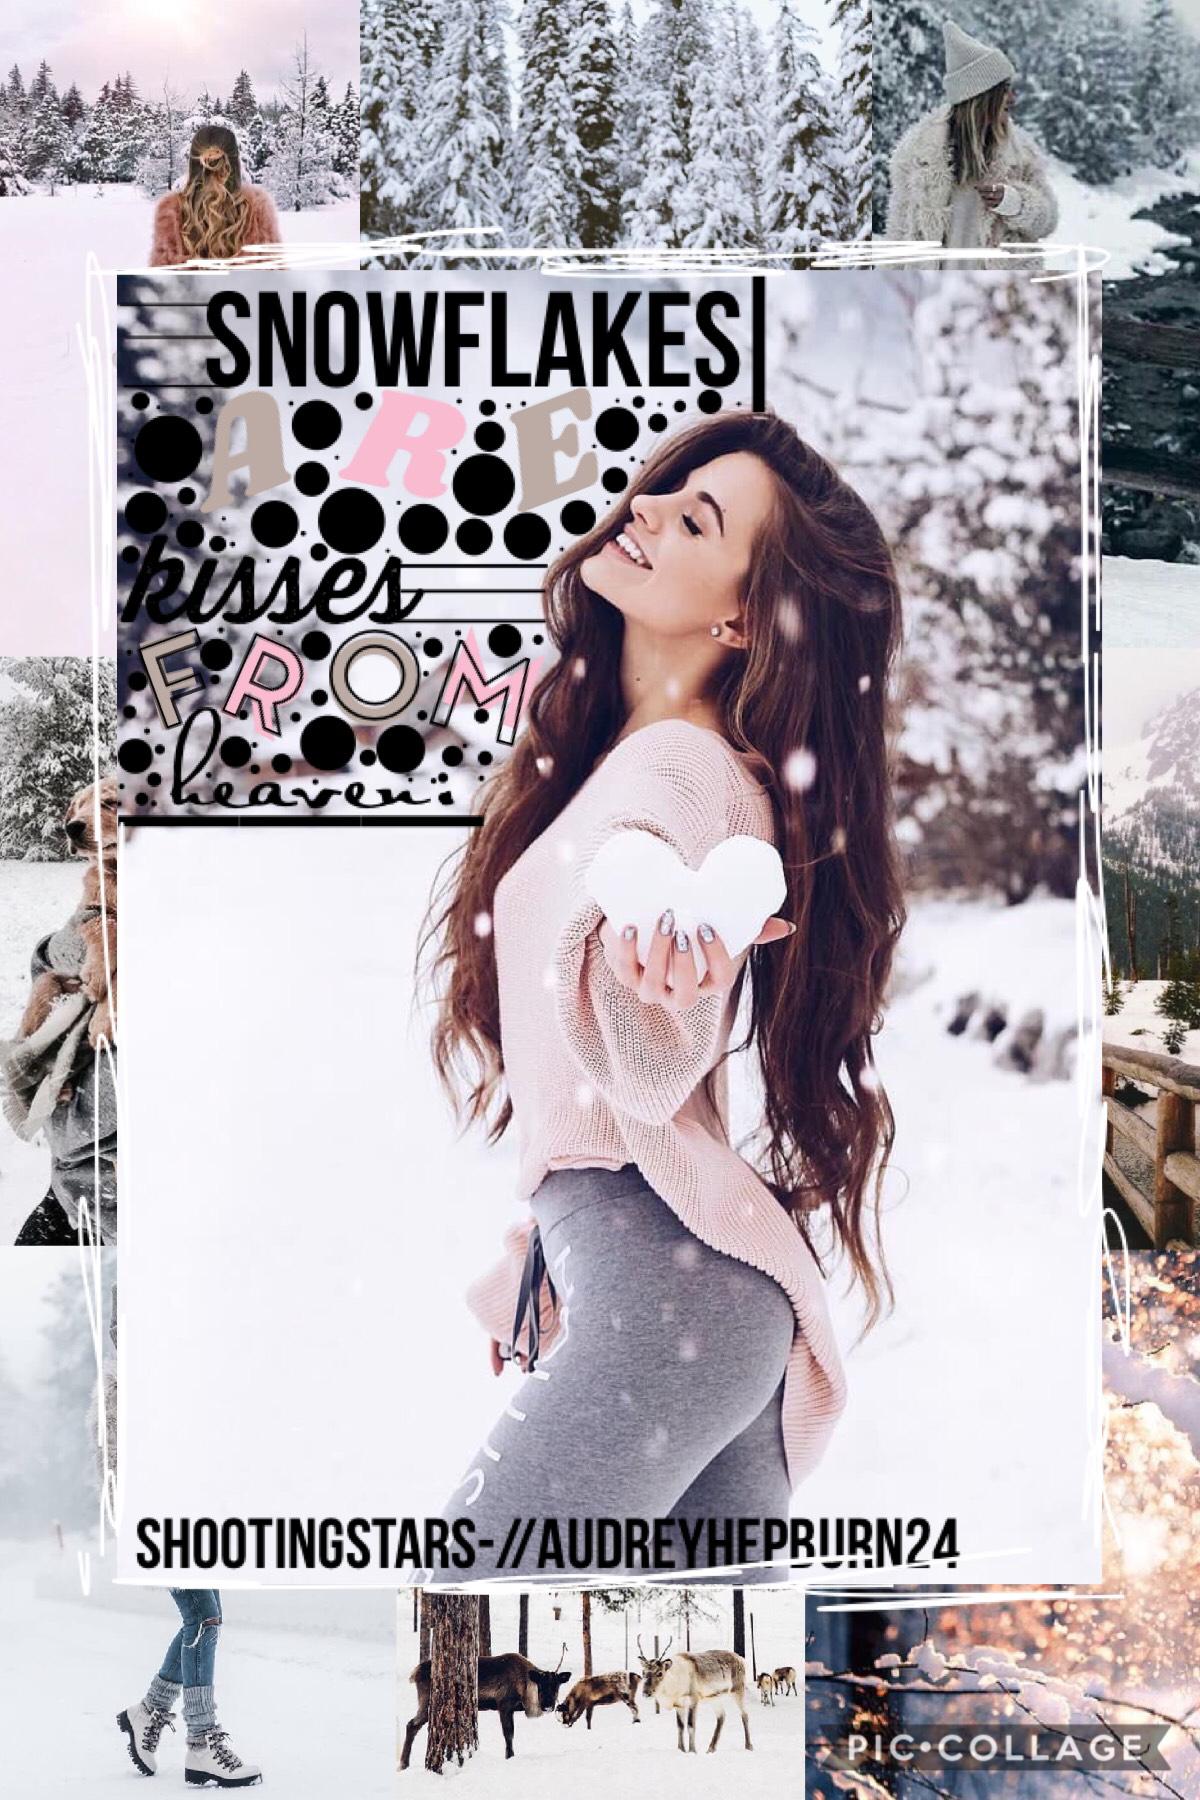 ❄️{31/55}Collab with the kindest (Tap)❄️
audreyhepburn24!!! GO FOLLOW HER!
I put everything together and she chose the quote and backgrounds!! ❤️ 

Q// ❄️,🌸,🌞,or 🍂?
A// ❄️!!!